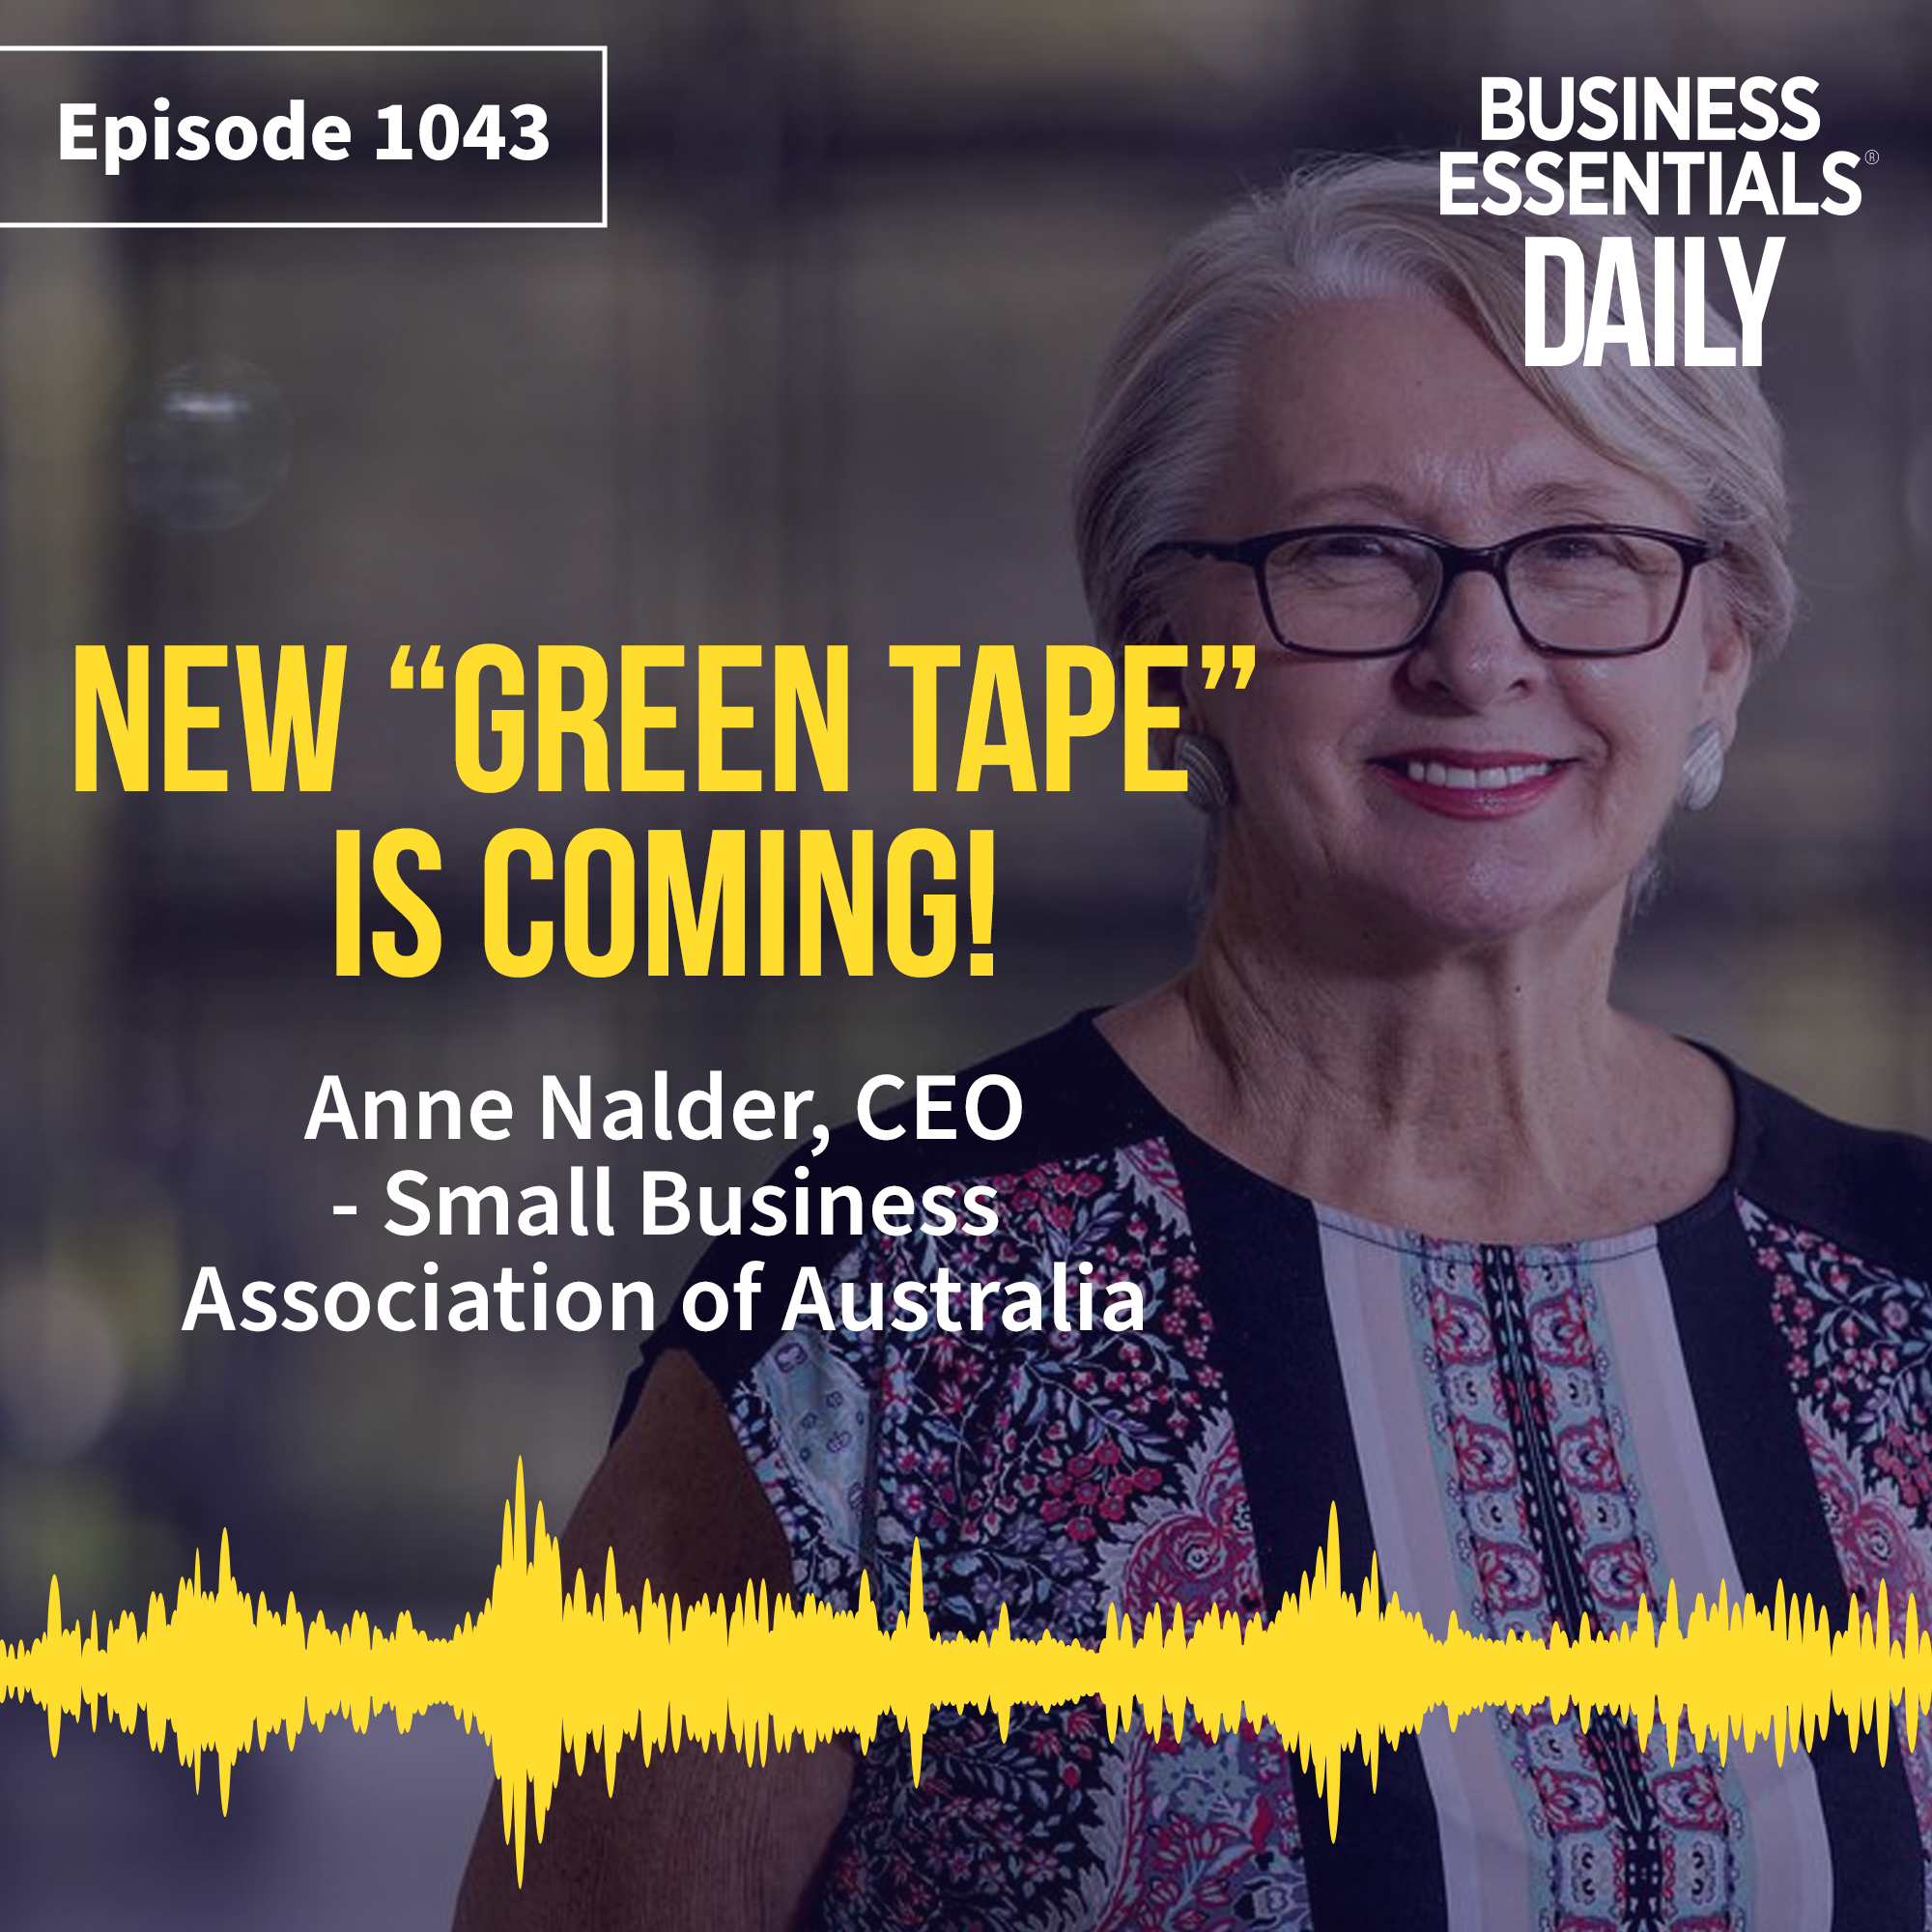 New ”green tape” is coming!